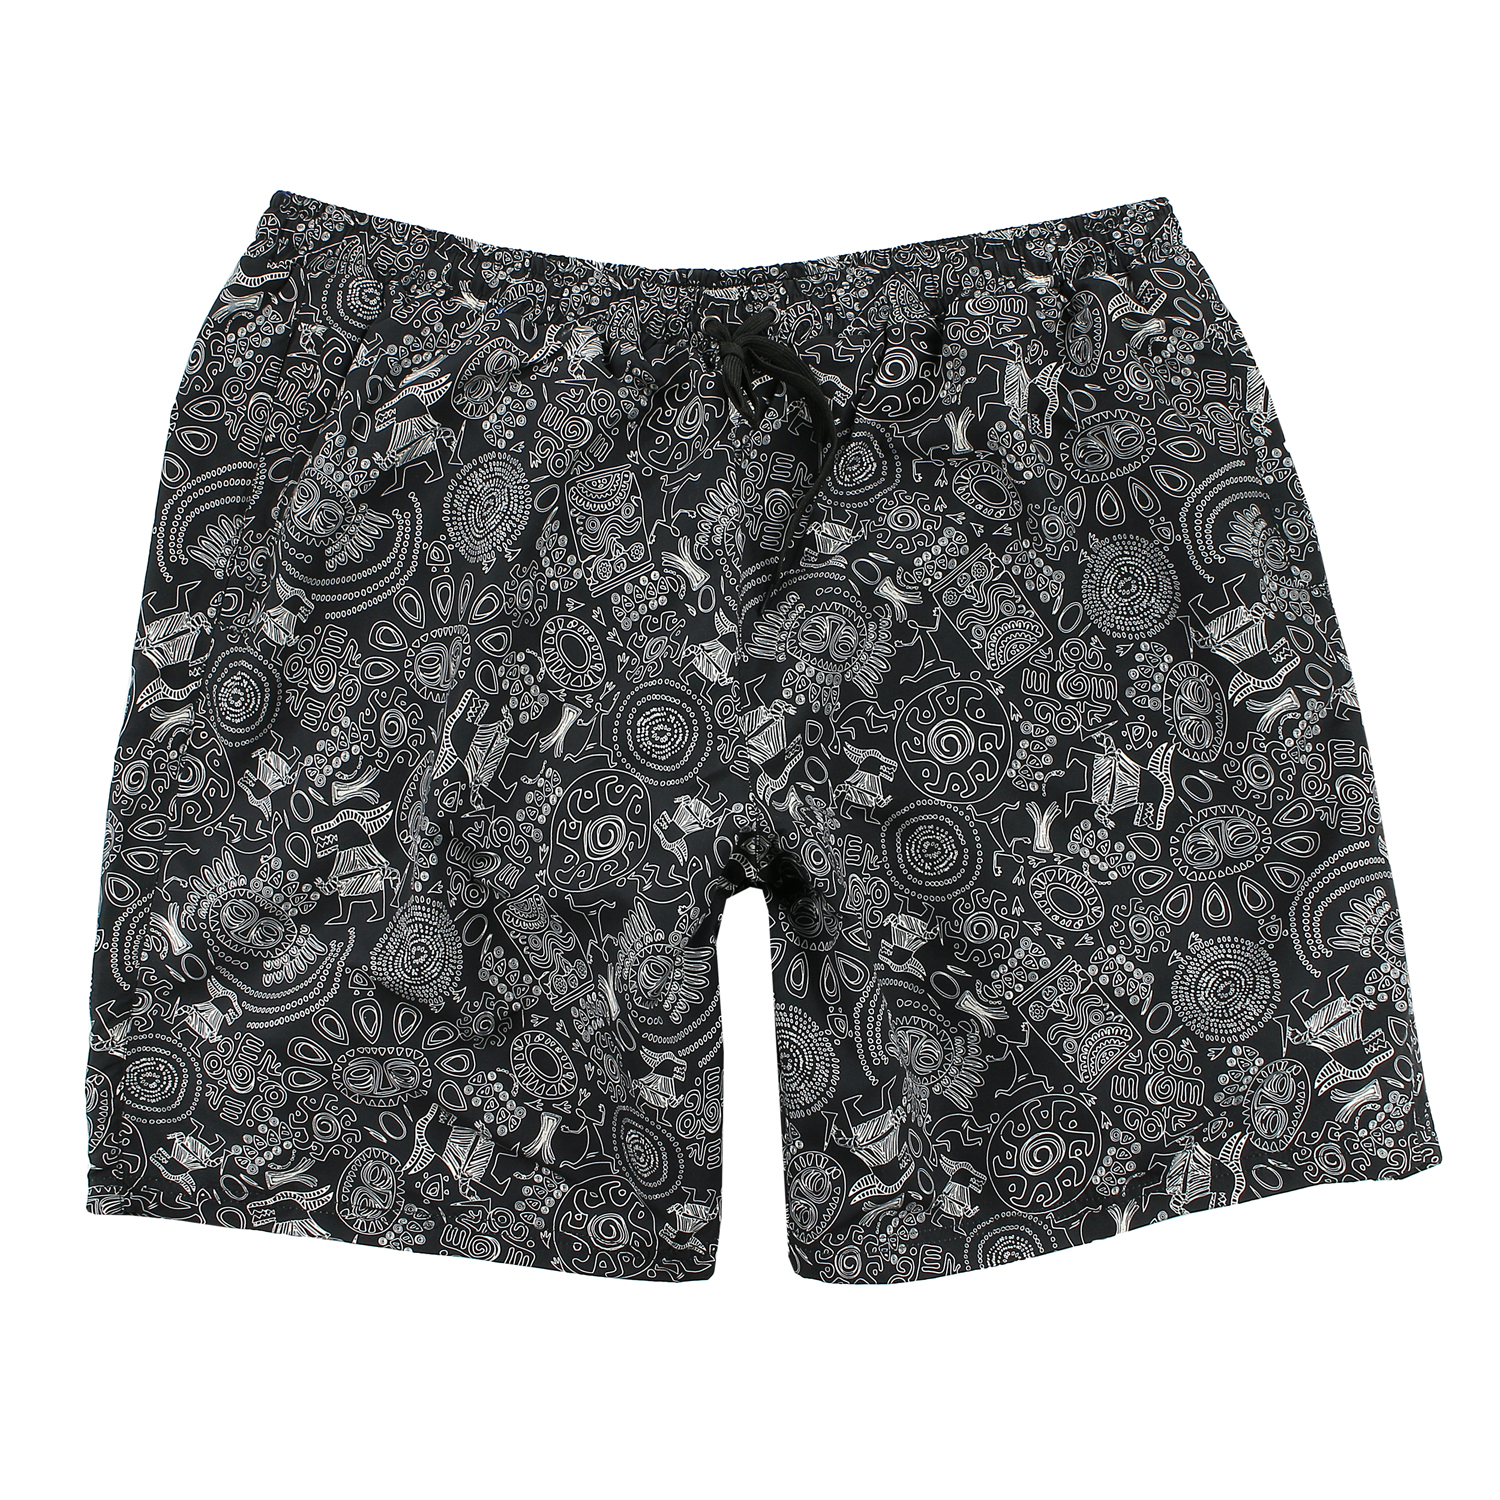 Swimming trunks in black with inka print by Abraxas up to oversize 10XL